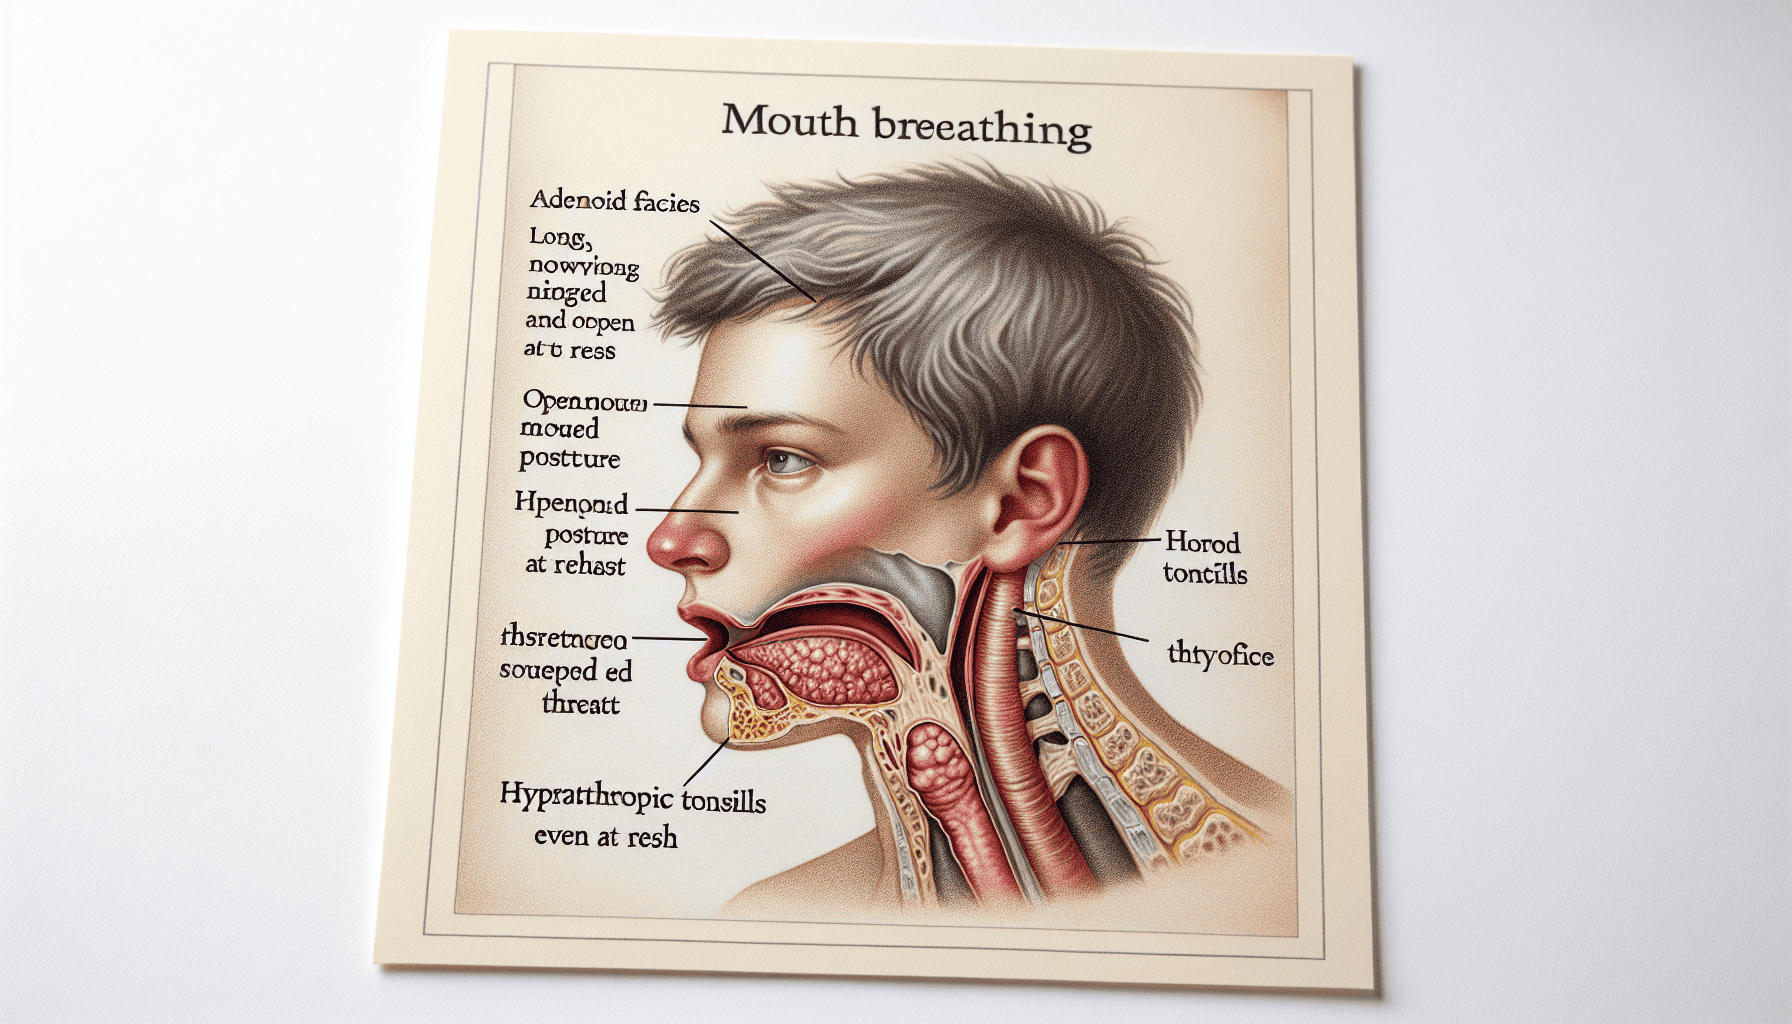 Illustration of characteristics used to diagnose mouth breathing issues